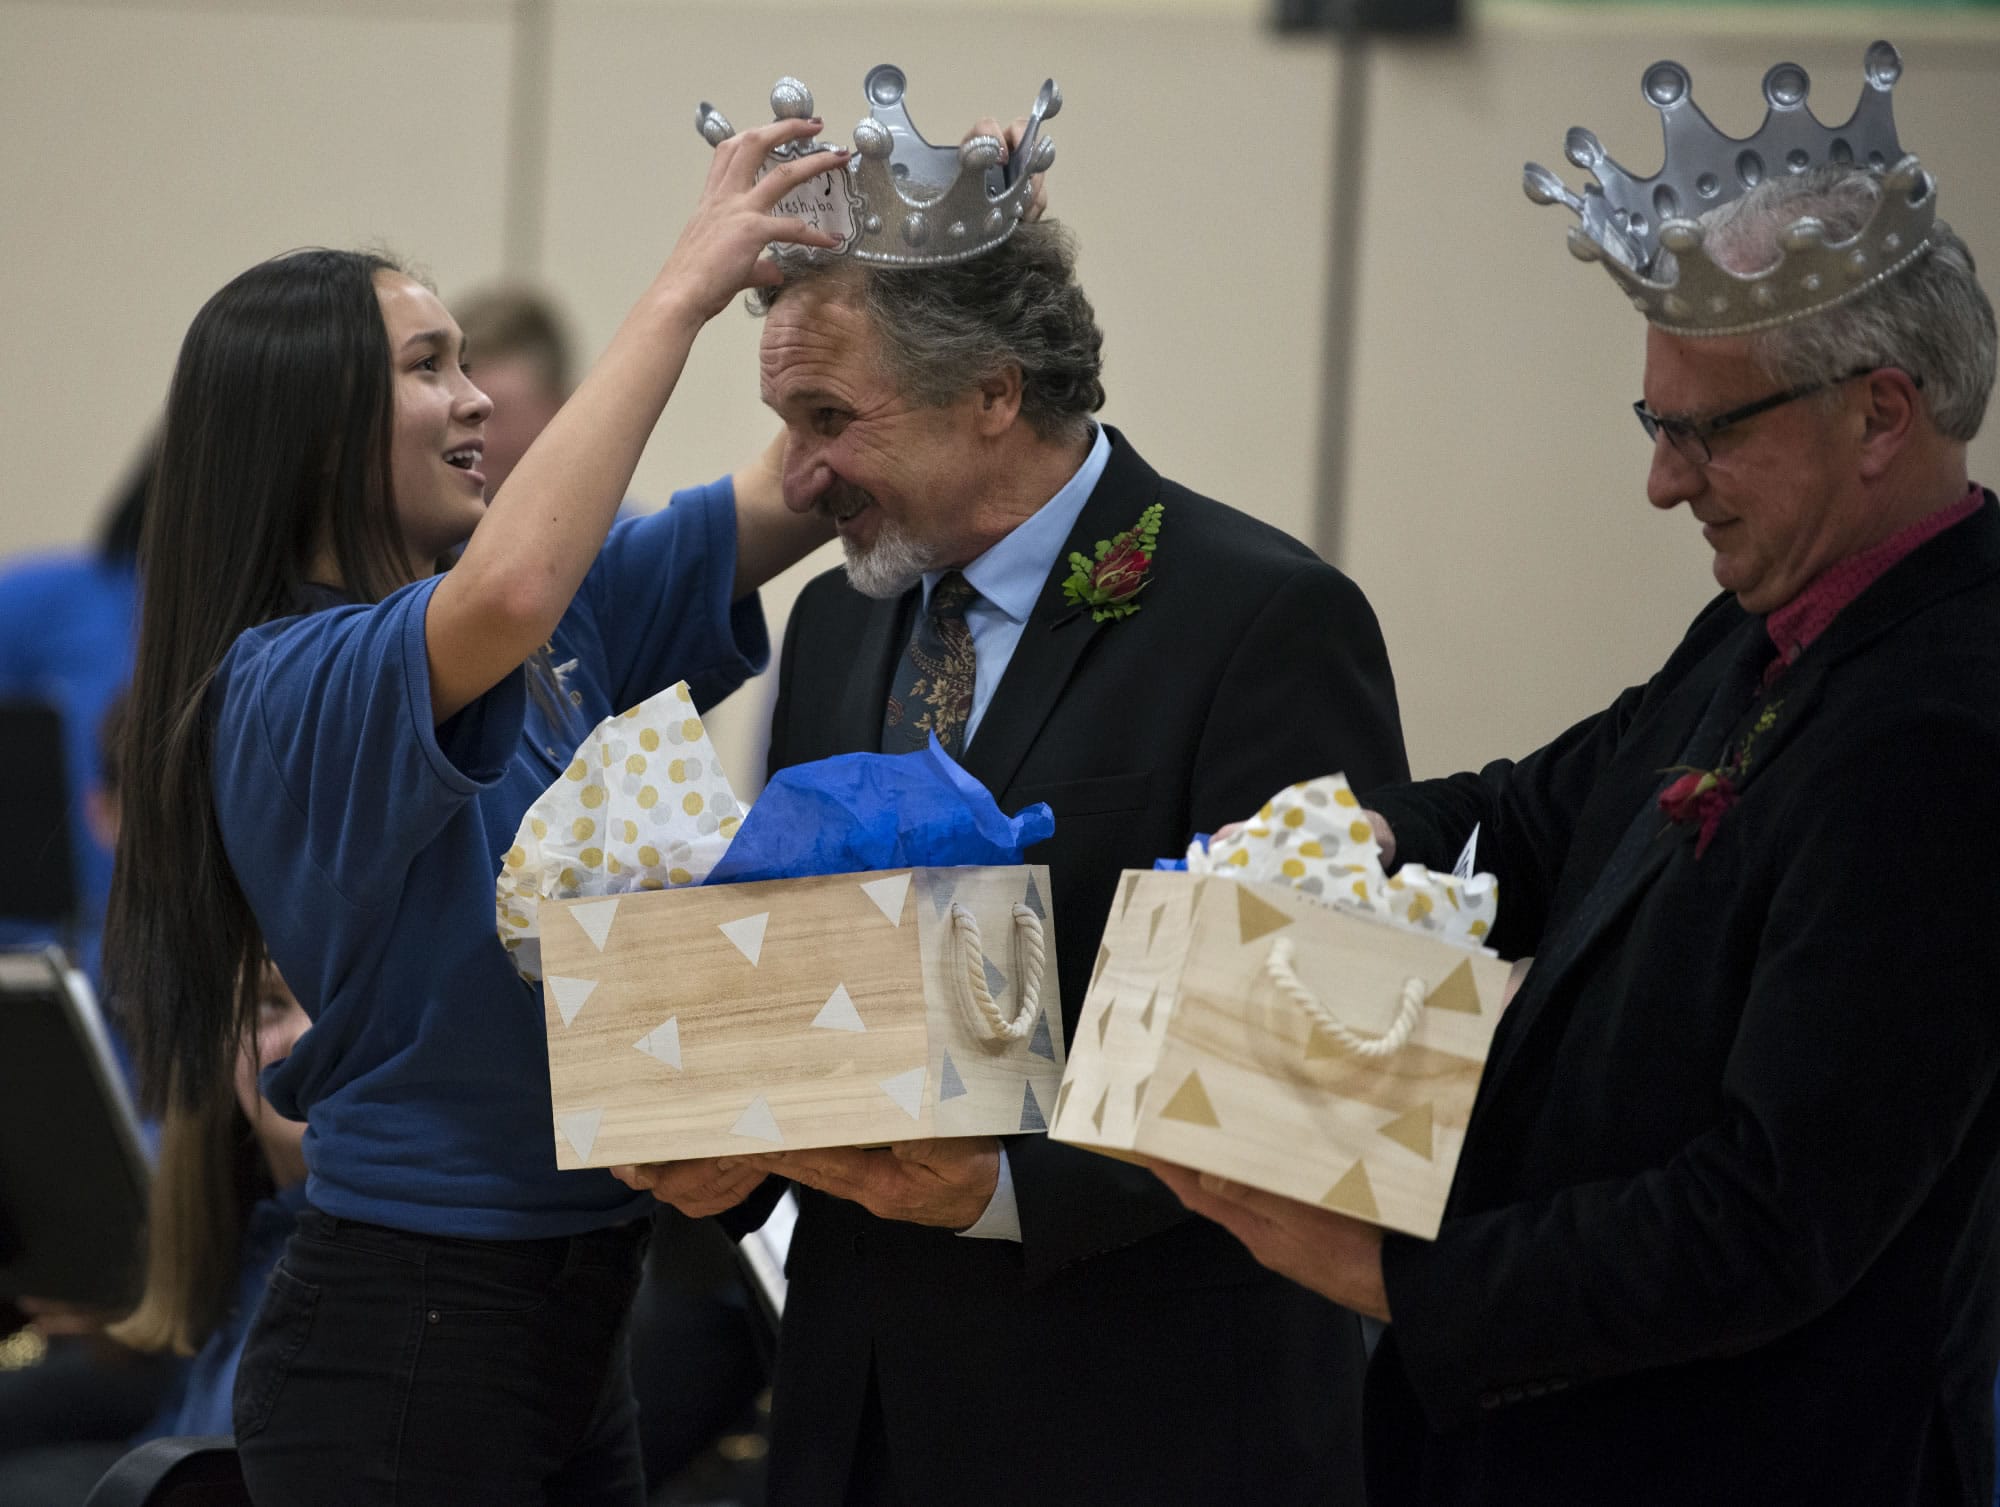 Wy’east Middle School eighth-grader Lillian Kates, from left, presents music teachers Mark Neshyba and Pete Boule with gifts from the eighth-grade class during the duo’s retirement celebration at the school on Tuesday. The eighth-grade class declared the teachers “Kings of Wy’east” in honor of their combined 56 years of teaching at the school. Both retire this year.